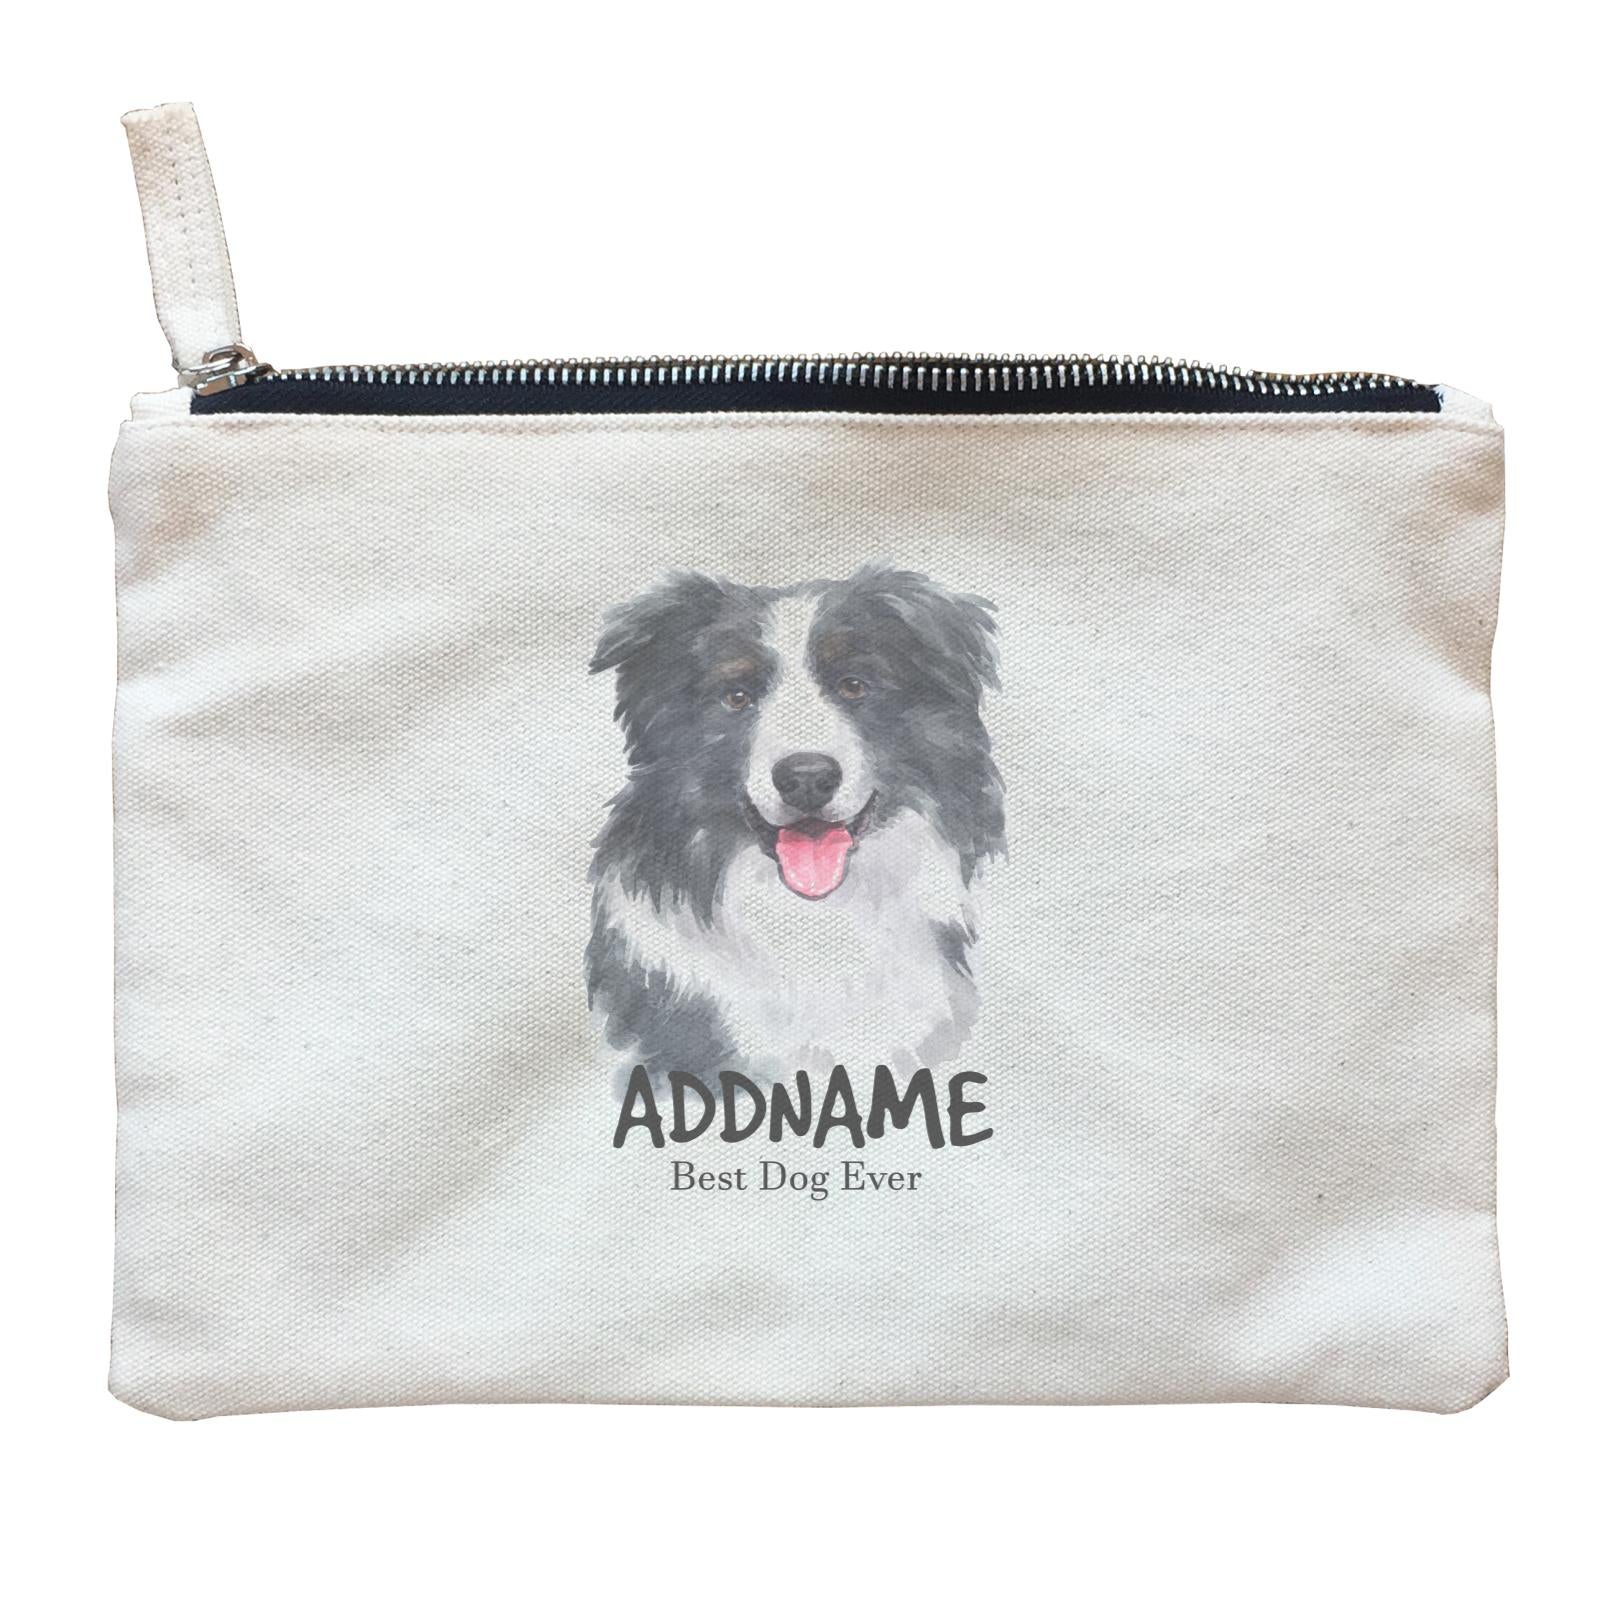 Watercolor Dog Border Collie Smile Best Dog Ever Addname Zipper Pouch